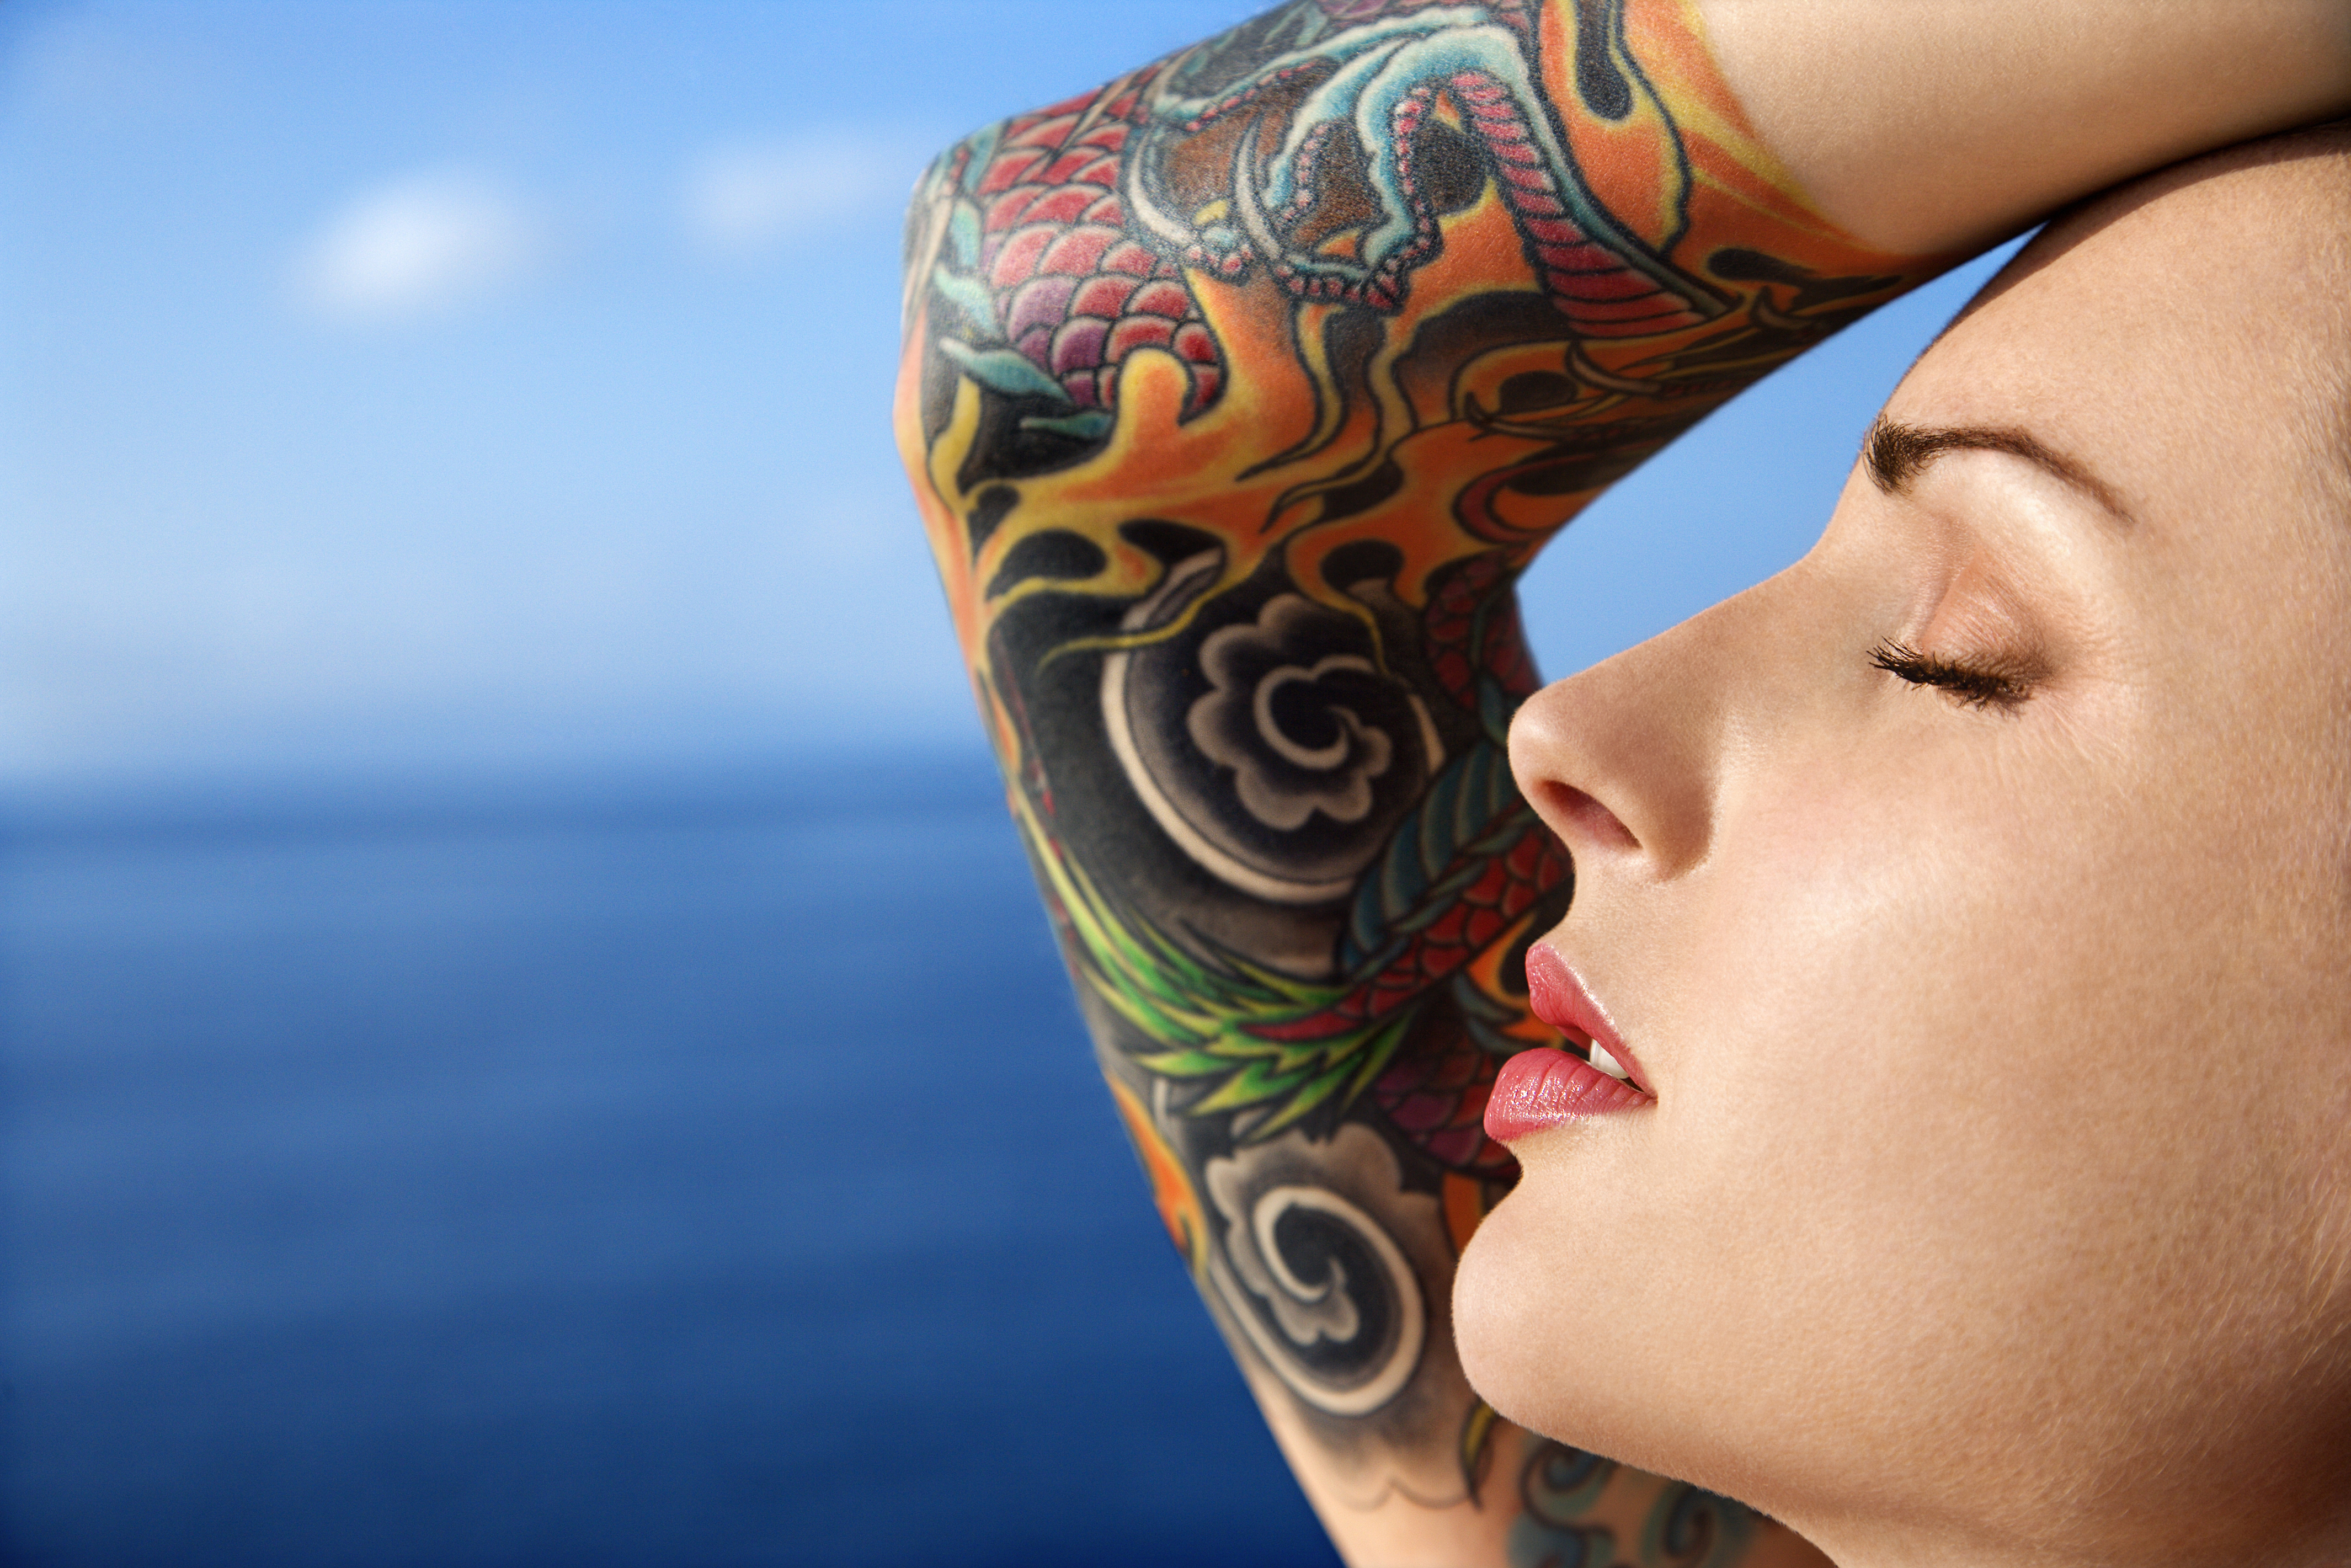 Colorchanging tattoos will track your glucose levels study